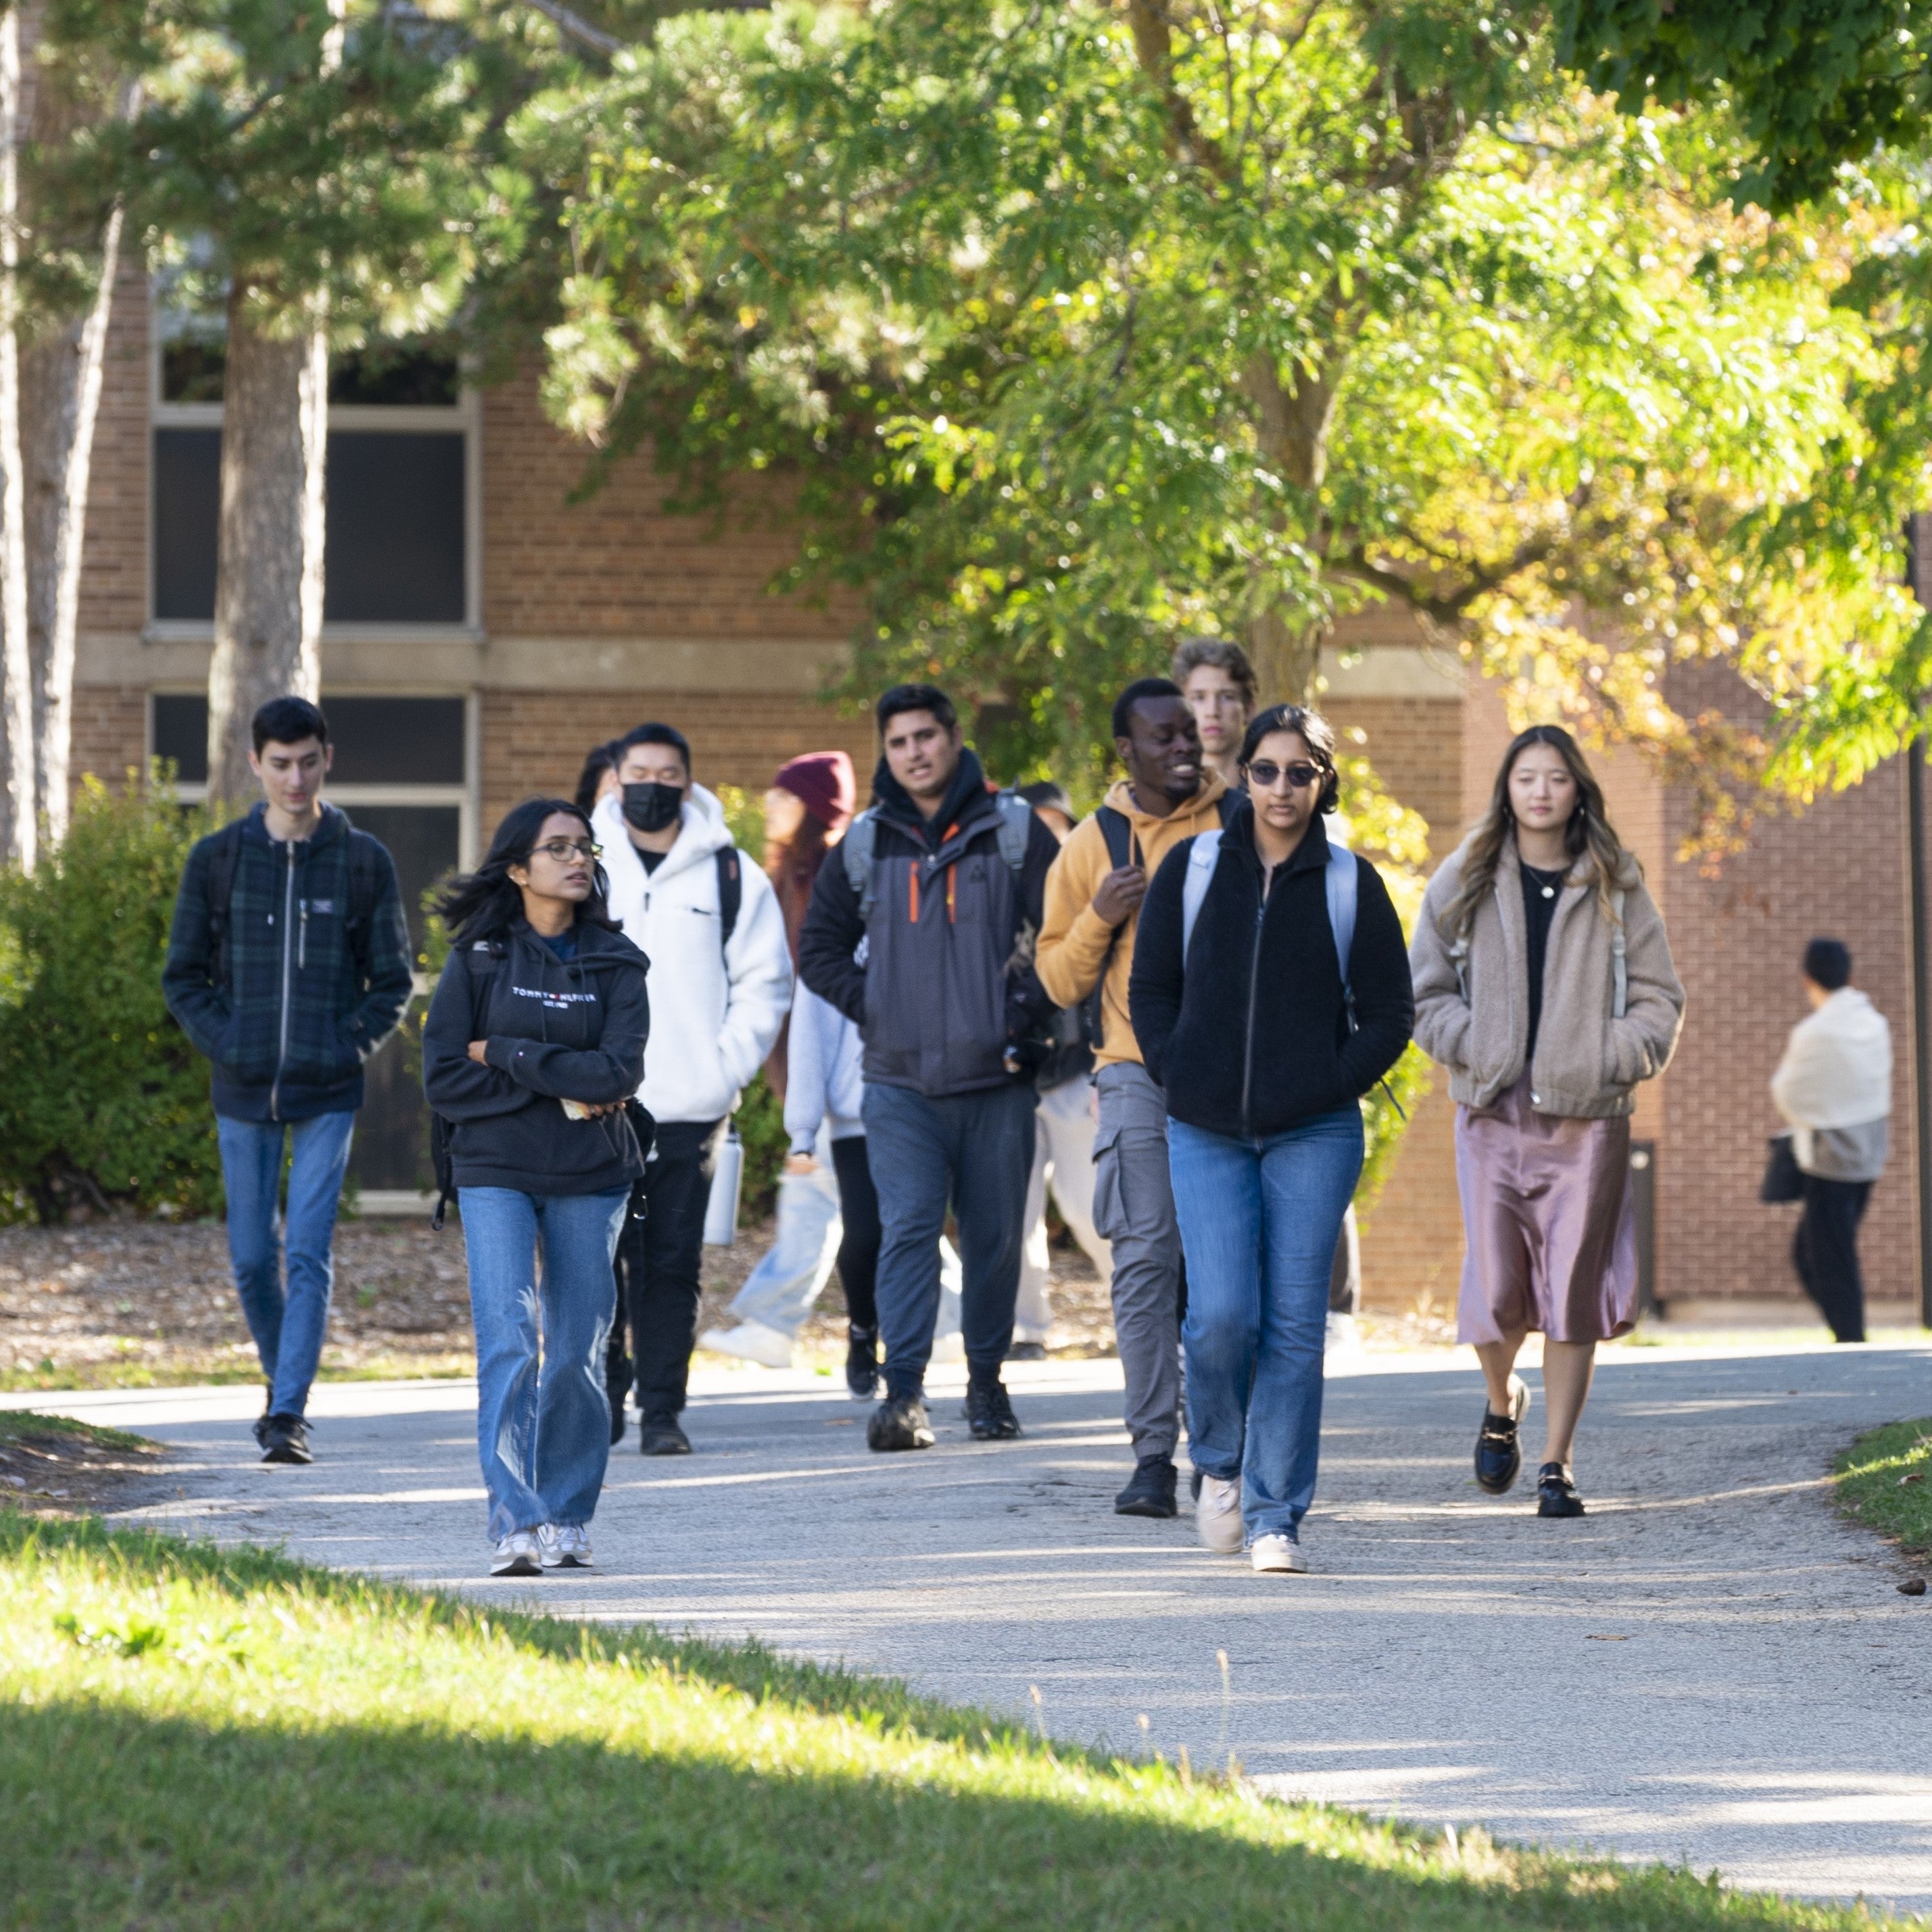 Students on campus walking on a path